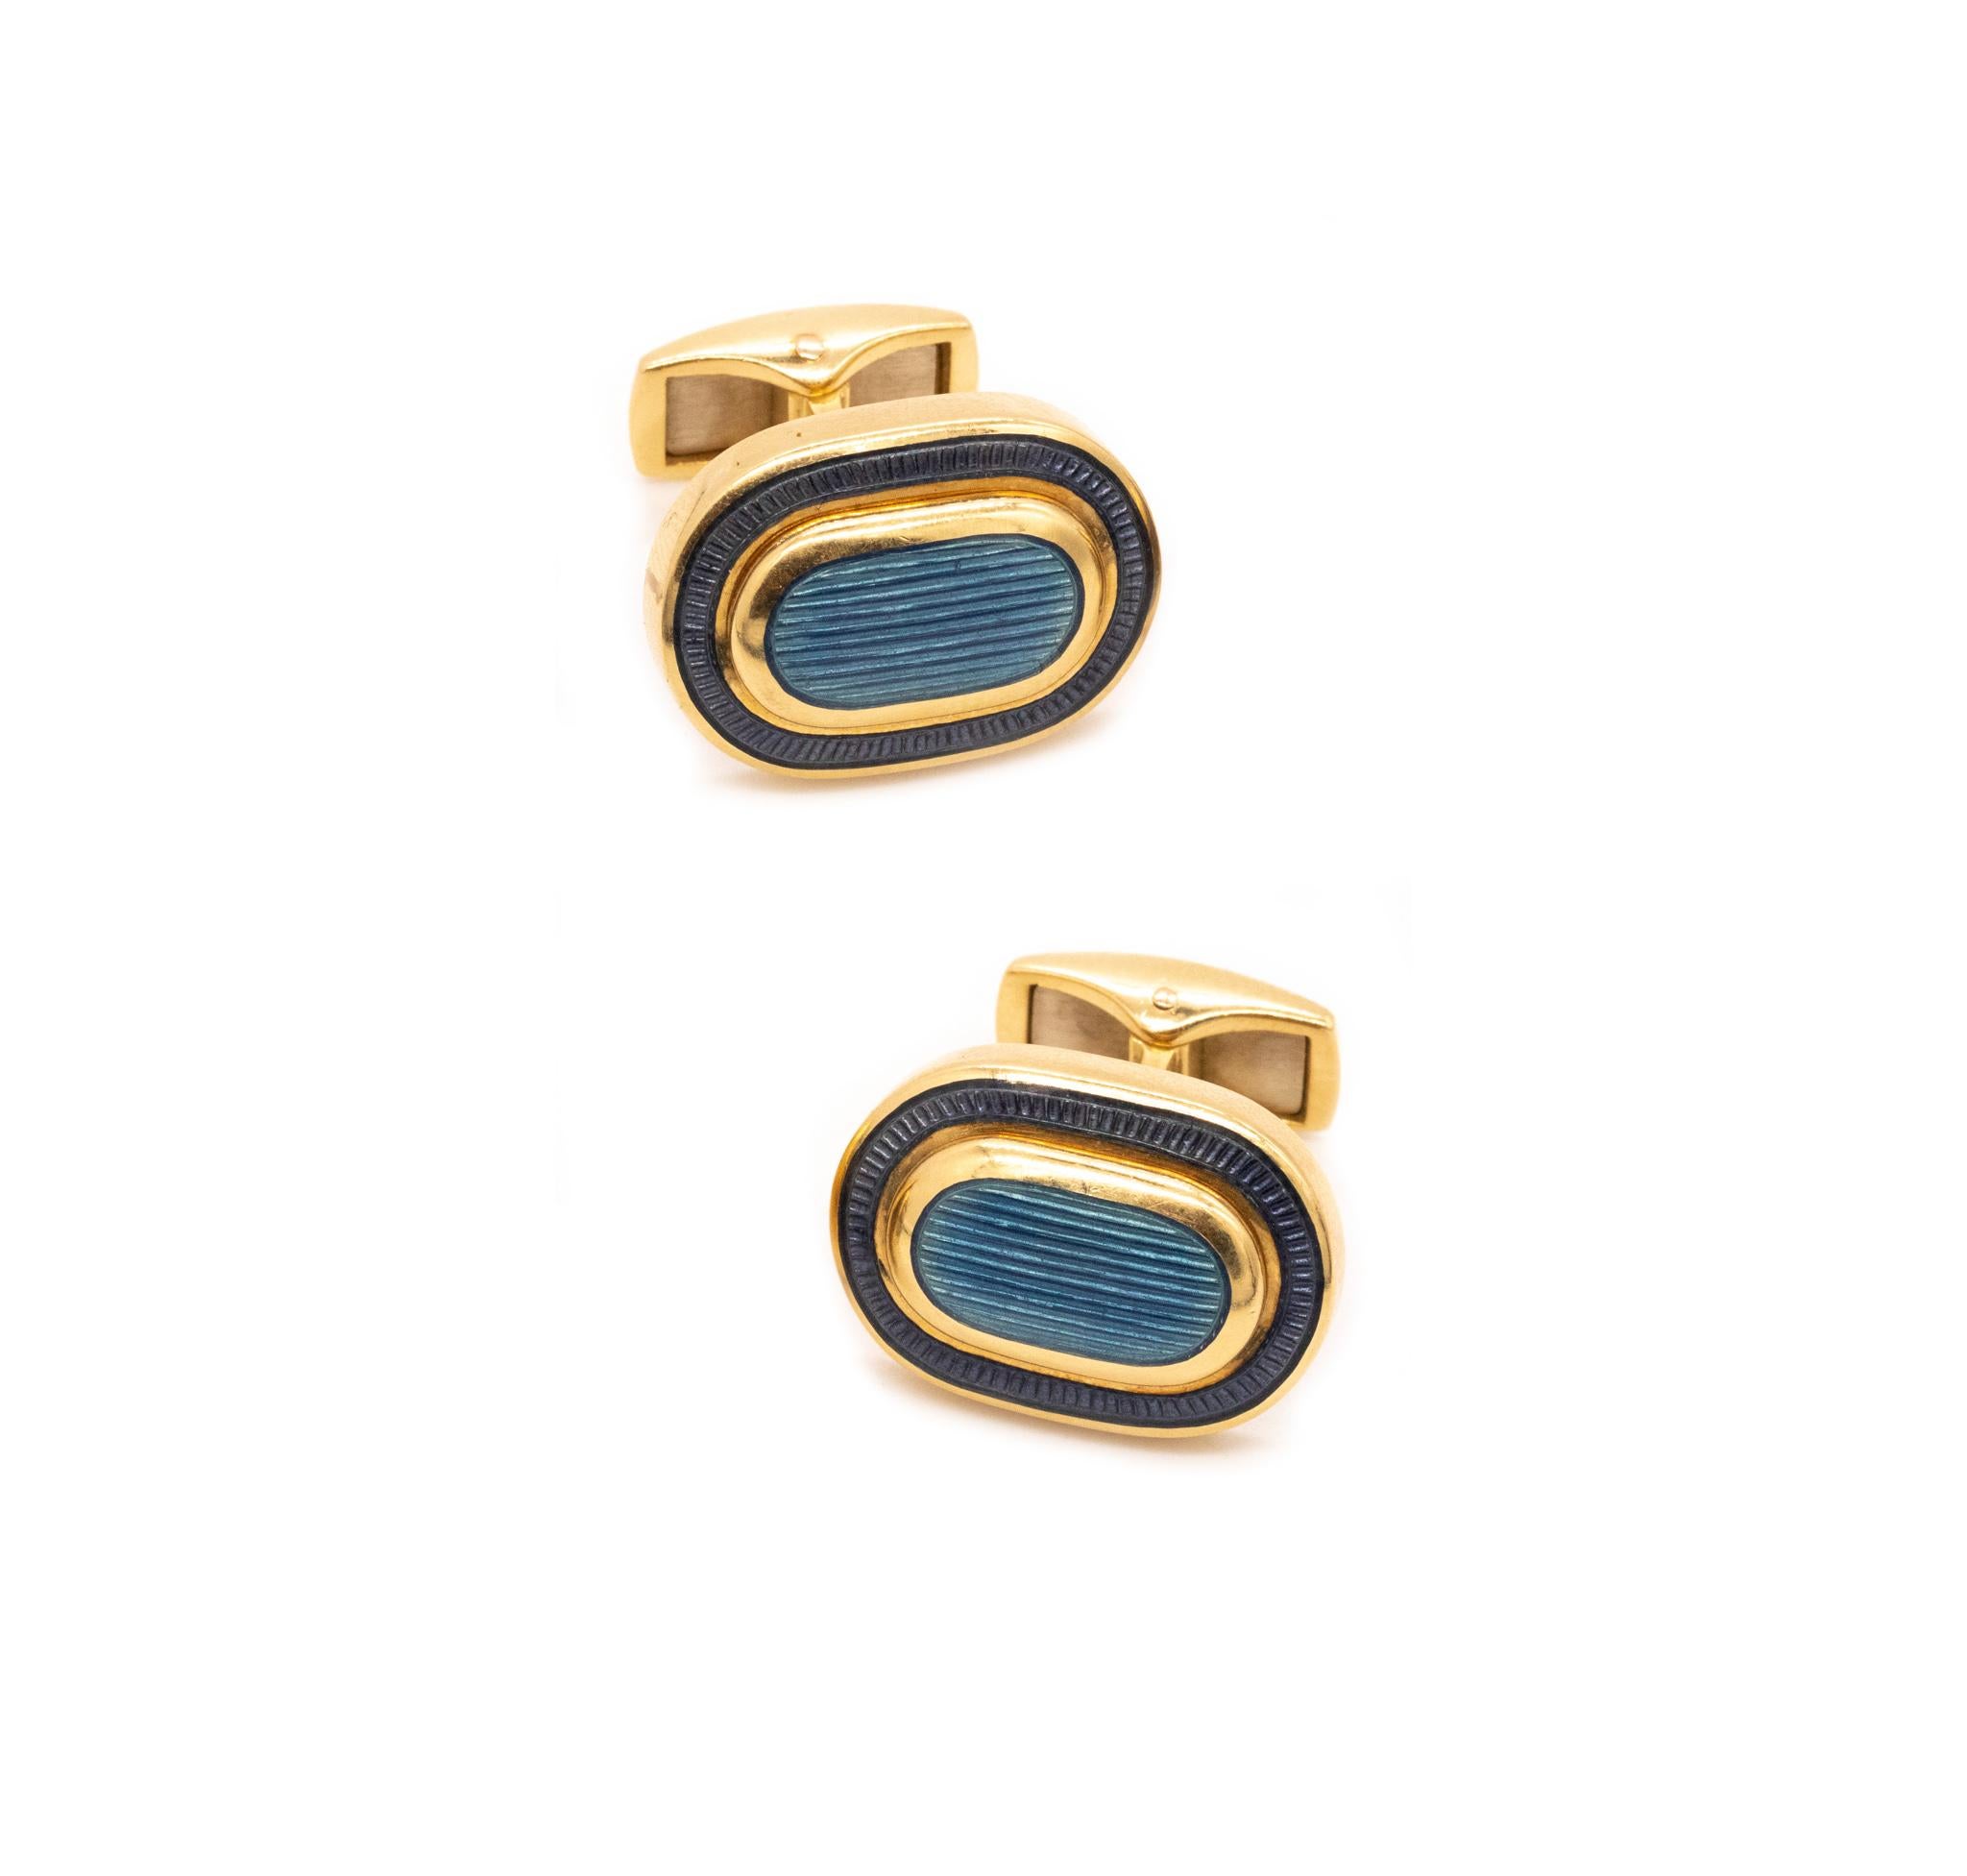 Pair of cufflinks designed by Leo De Vroomen.

A beautiful and colorful one-of-a-kind geometric pieces, created in London, United Kingdom by jewelry house of Leo De Vroomen. This pair of cufflinks was carefully crafted in solid yellow gold of 18